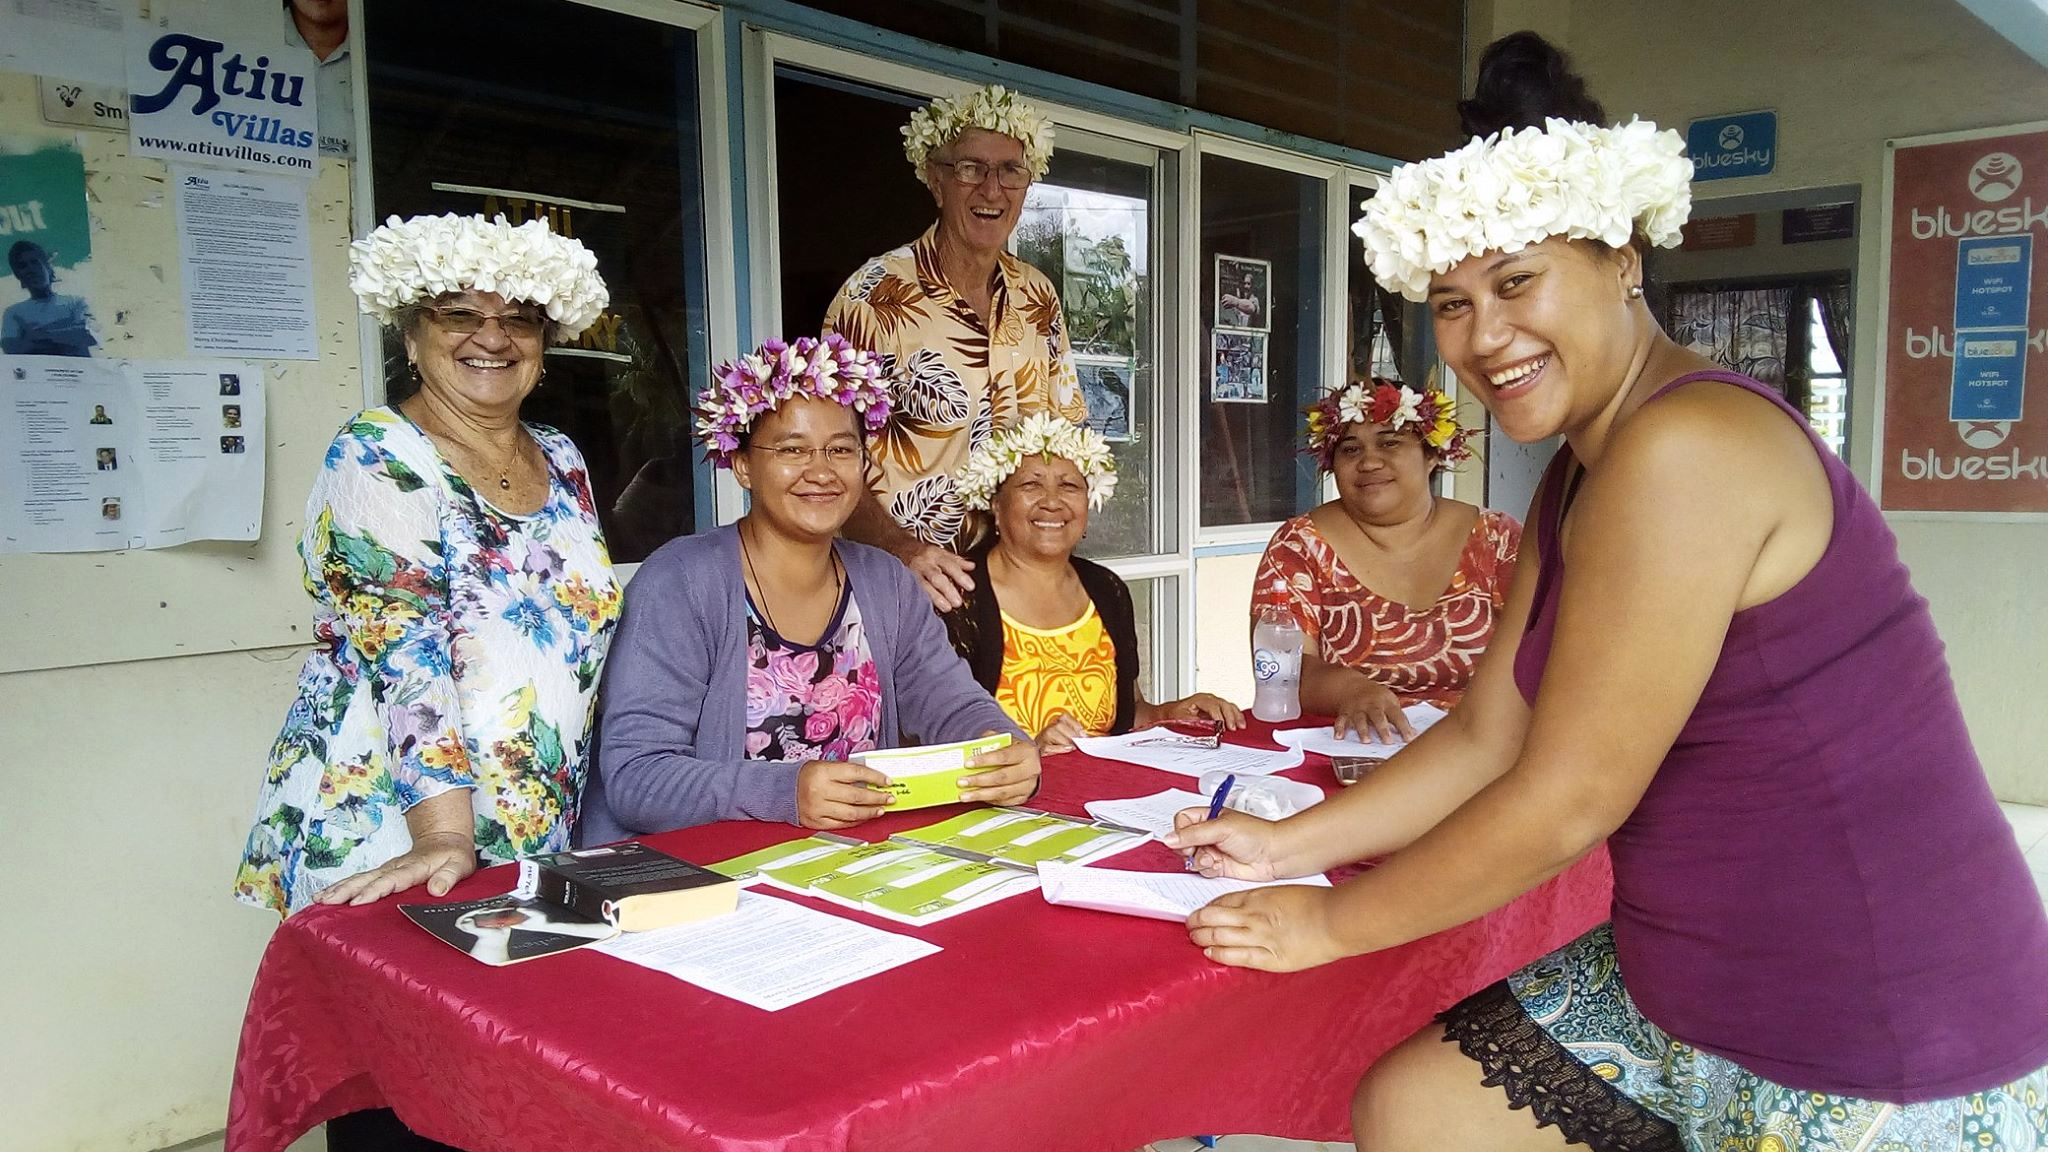 Atiu hopes for ‘return to normal’ after reopening